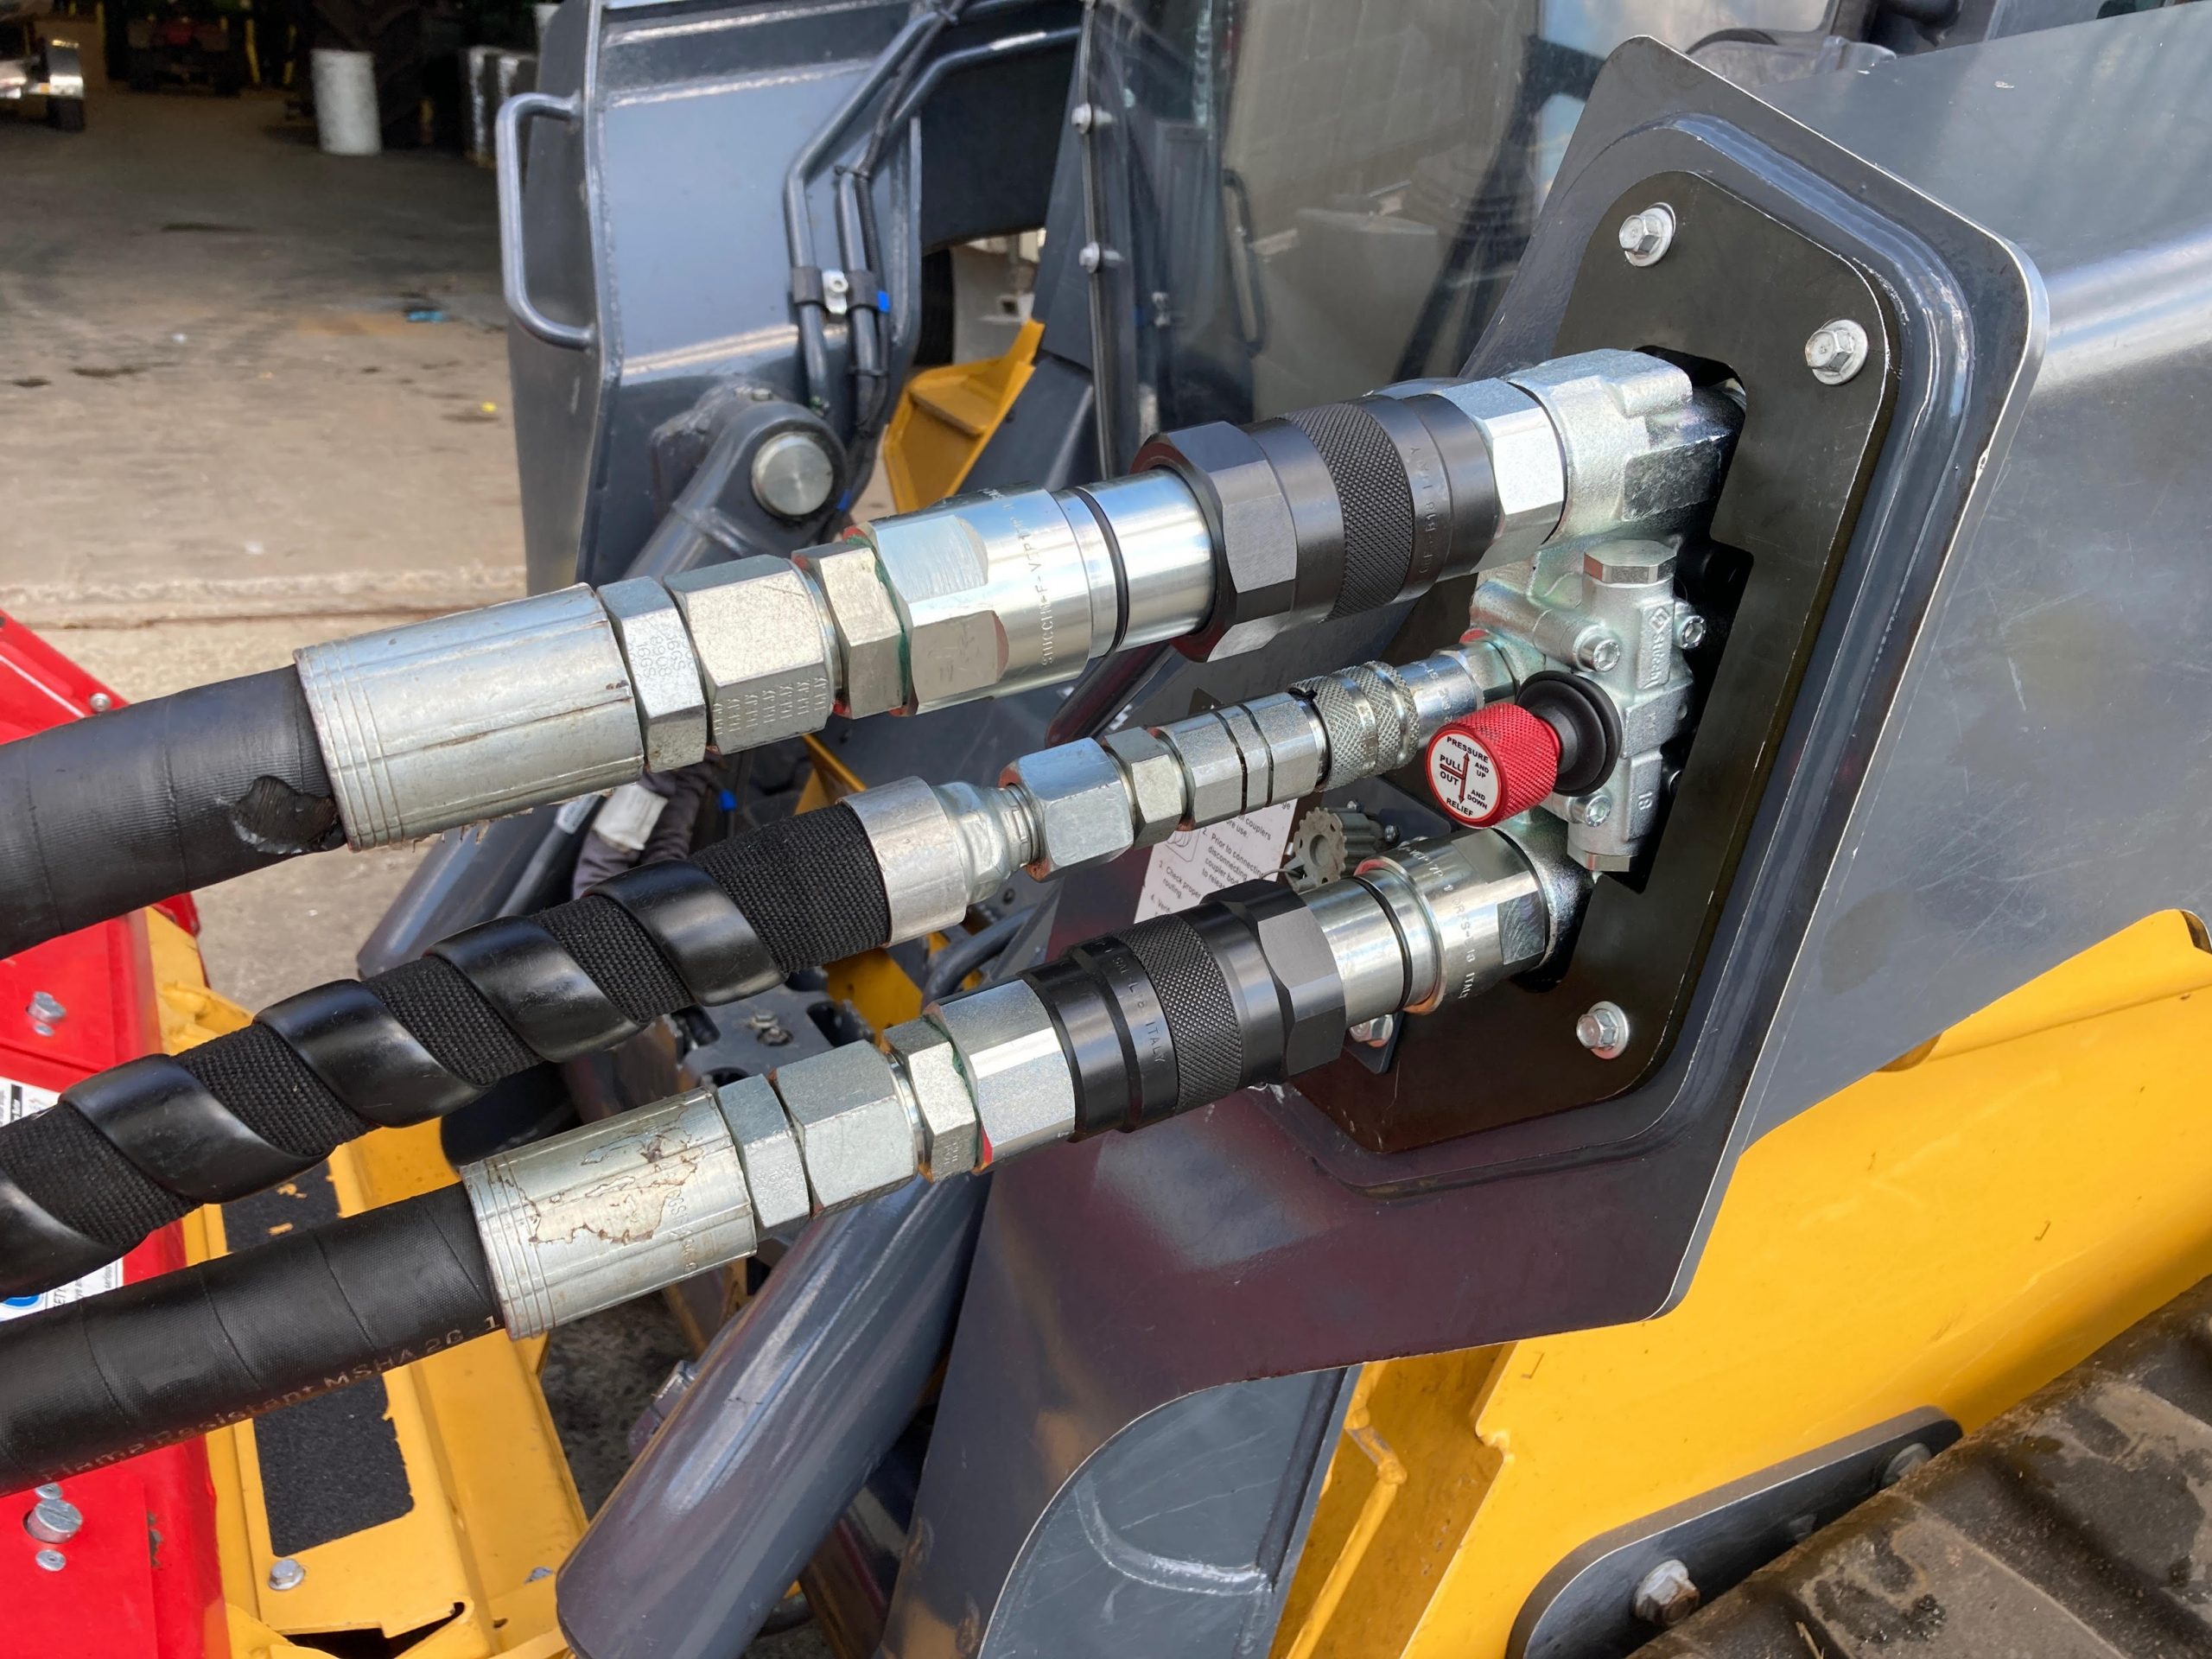 How-to Video: Convert Takeuchi Skid Steer to Use Stucchi VEP